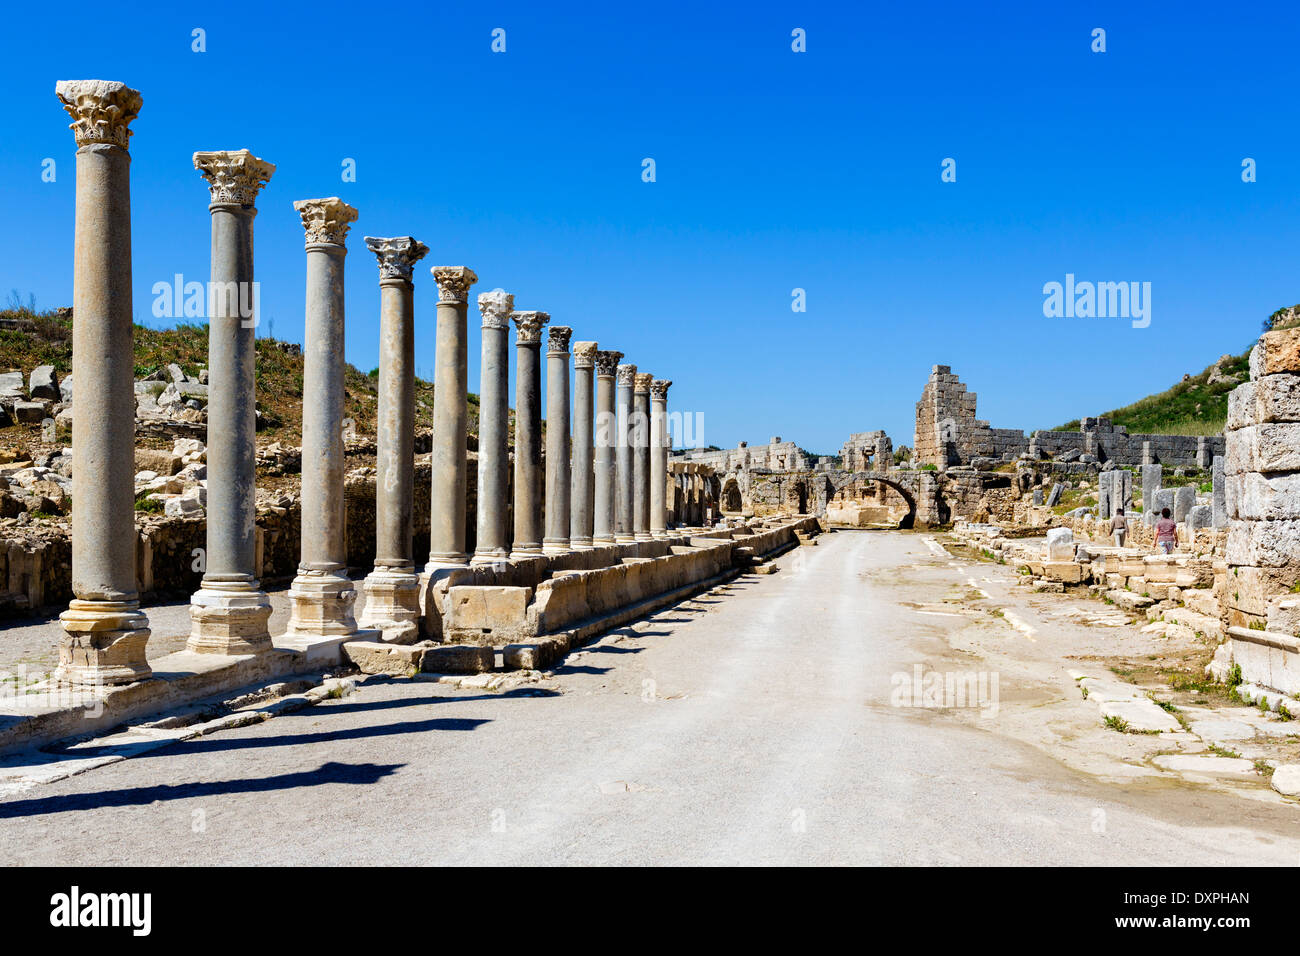 The Colonnaded street near the Palaestra in the ruins of the ancient city of Perge, Pamphylia, Antalya Province, Turkey Stock Photo